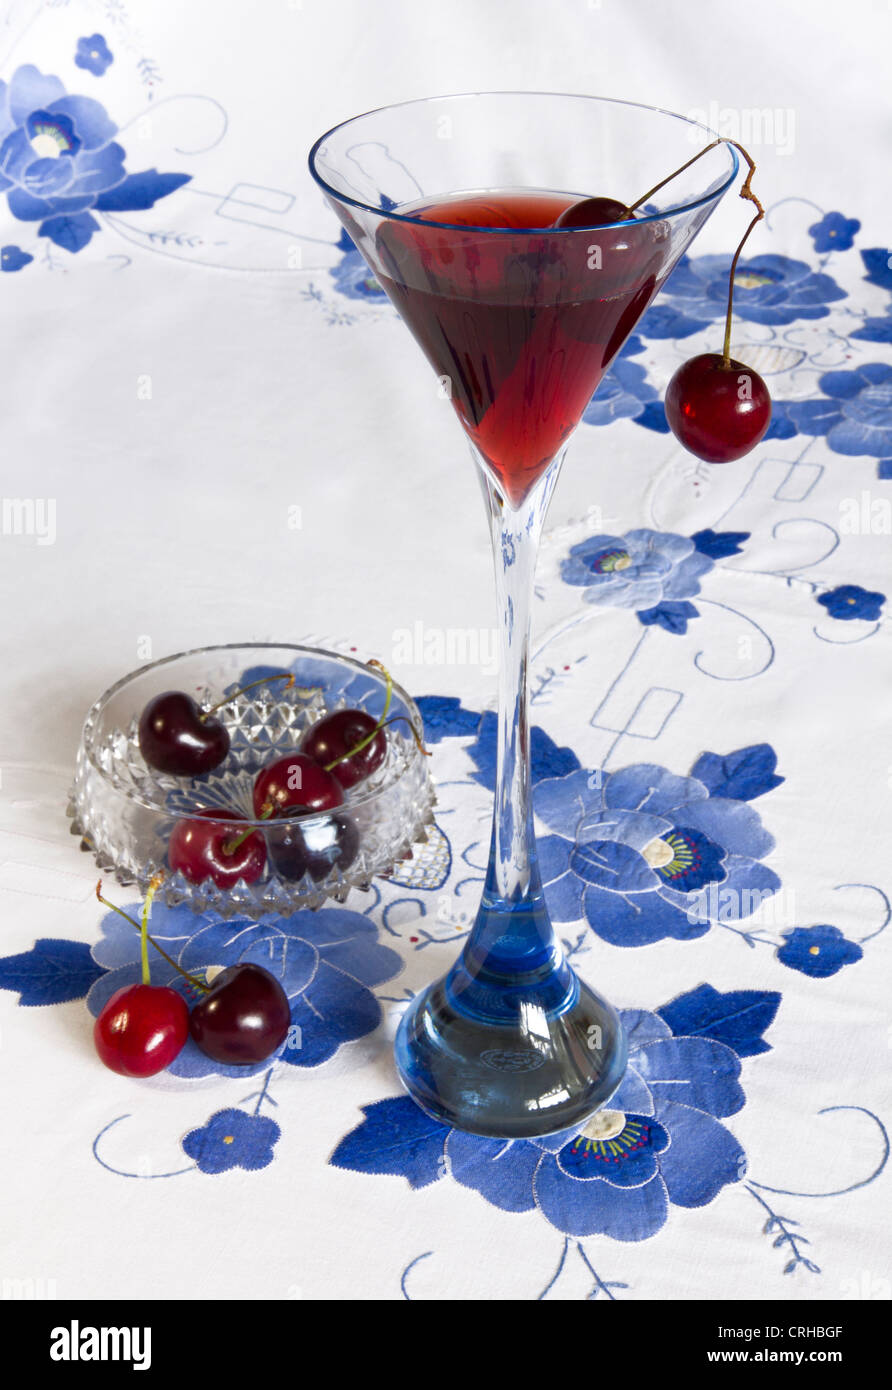 Baccarat Glass, long stemmed with fruit juice and cherries on Blue applique embroidered tablecloth. Stock Photo